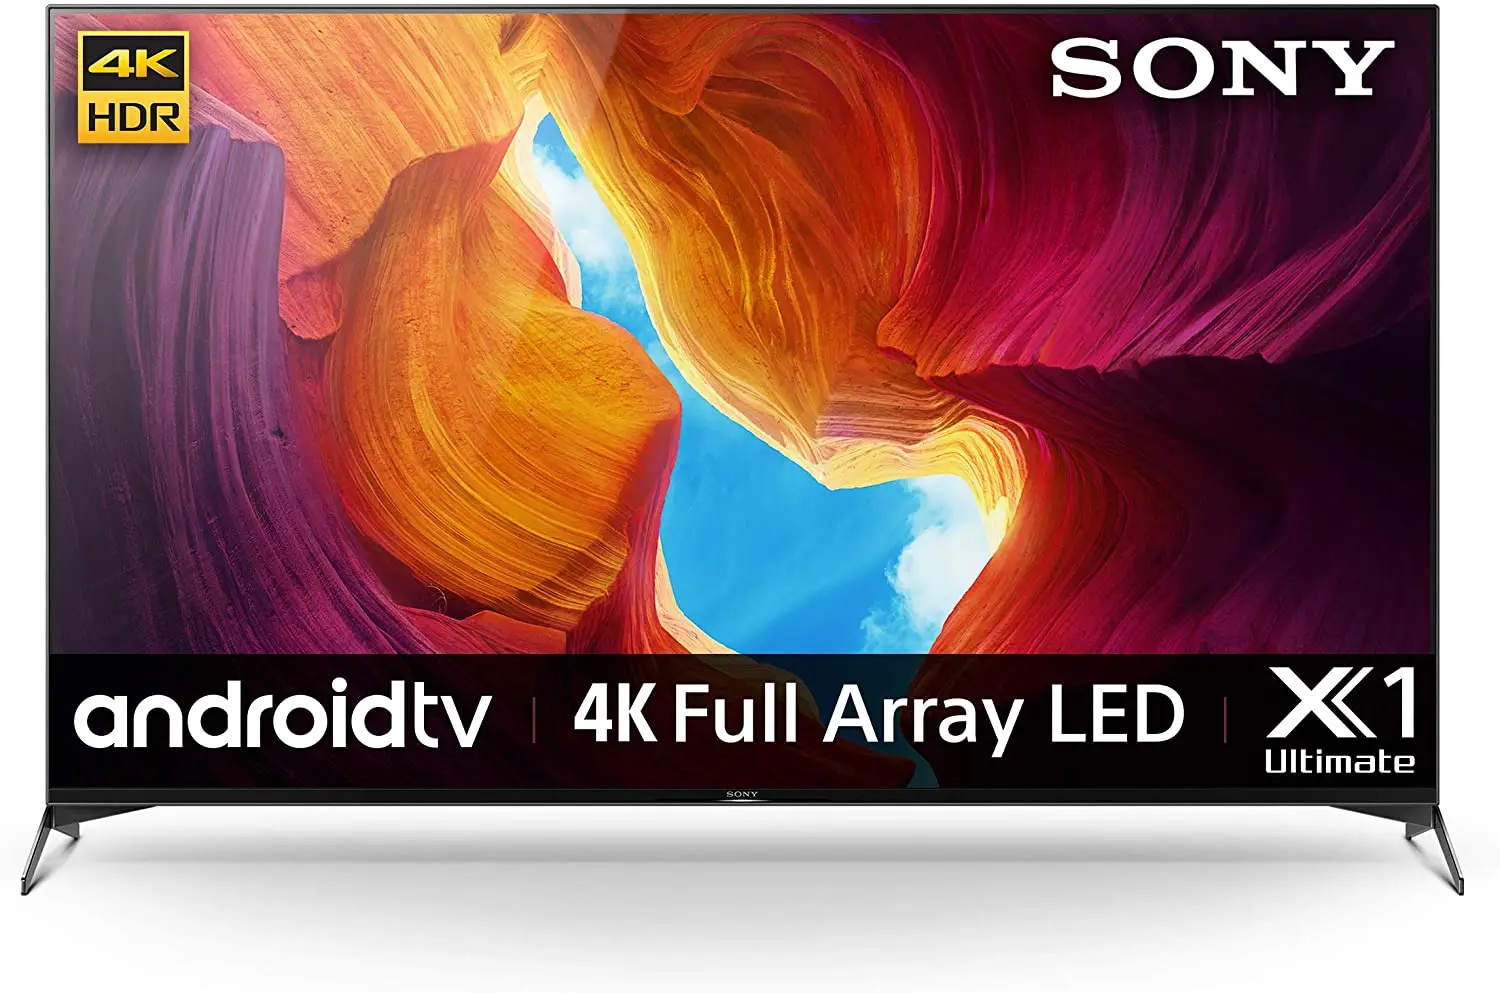 Sony KD-65X9000H Smart TV (Android TV) | 65 inch | Full Array LED | 4K Ultra HD | High Dynamic Range (HDR) | X90H Series